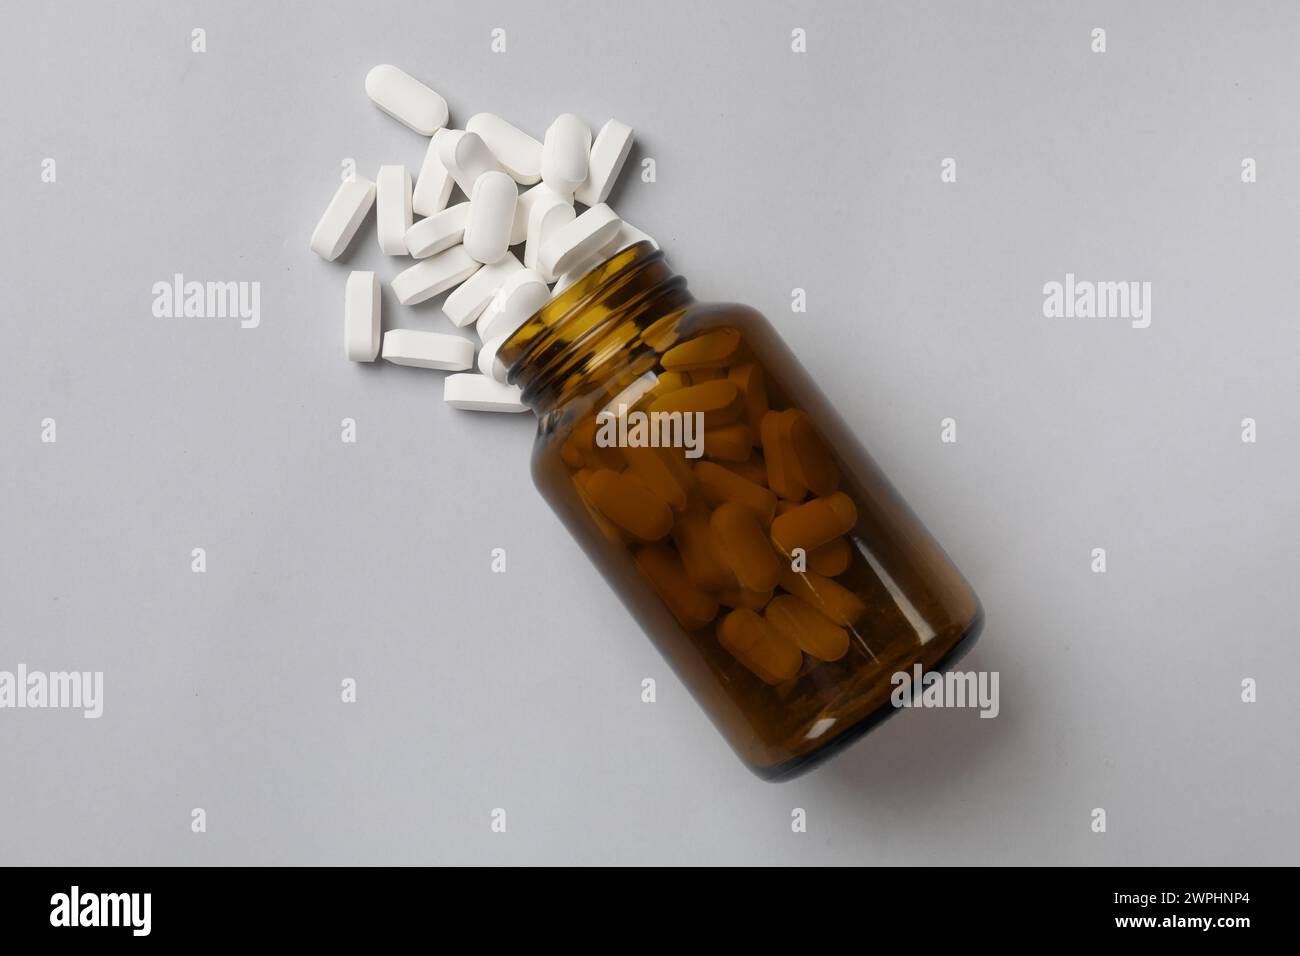 Vitamin pills and bottle on light grey background, top view Stock Photo